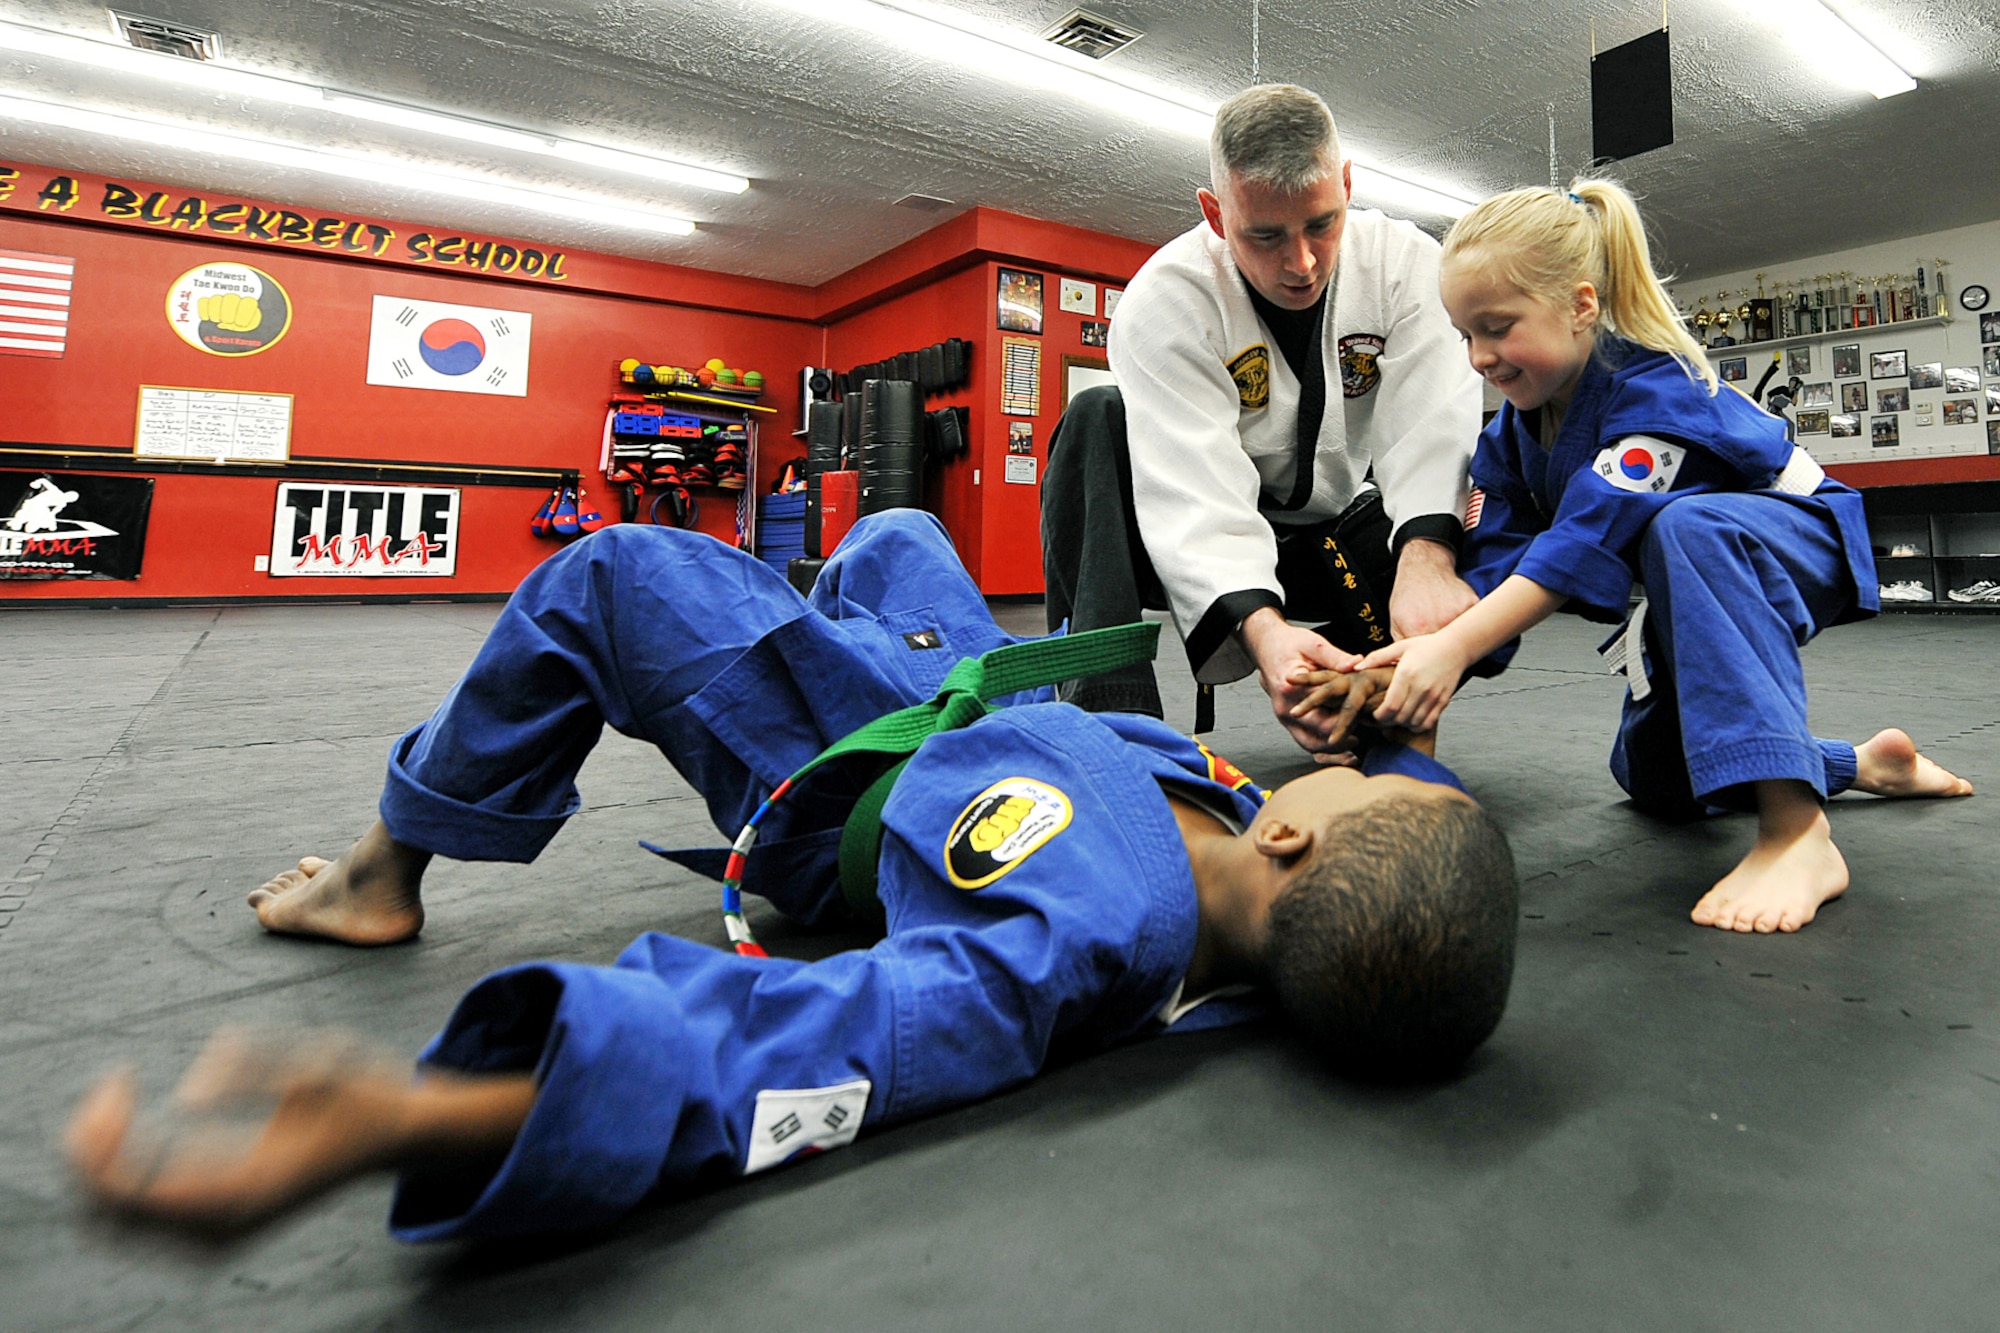 OFFUTT AIR FORCE BASE, Neb. - Gordon Taylor taps out when Tech. Sgt. Michael Munyon, with the 55th Security Forces Squadron, and Sophie Wolfe apply pressure to his wrist during a hapkido class at an Omaha dojang March 12. Sergeant Munyon currently holds a 5th degree black belt in Taekwondo and a 2nd degree black belt in Hapkido, another form of Korean martial arts. He was recently inducted into the Masters Hall of Fame.

U.S. Air Force Photo by Charles Haymond